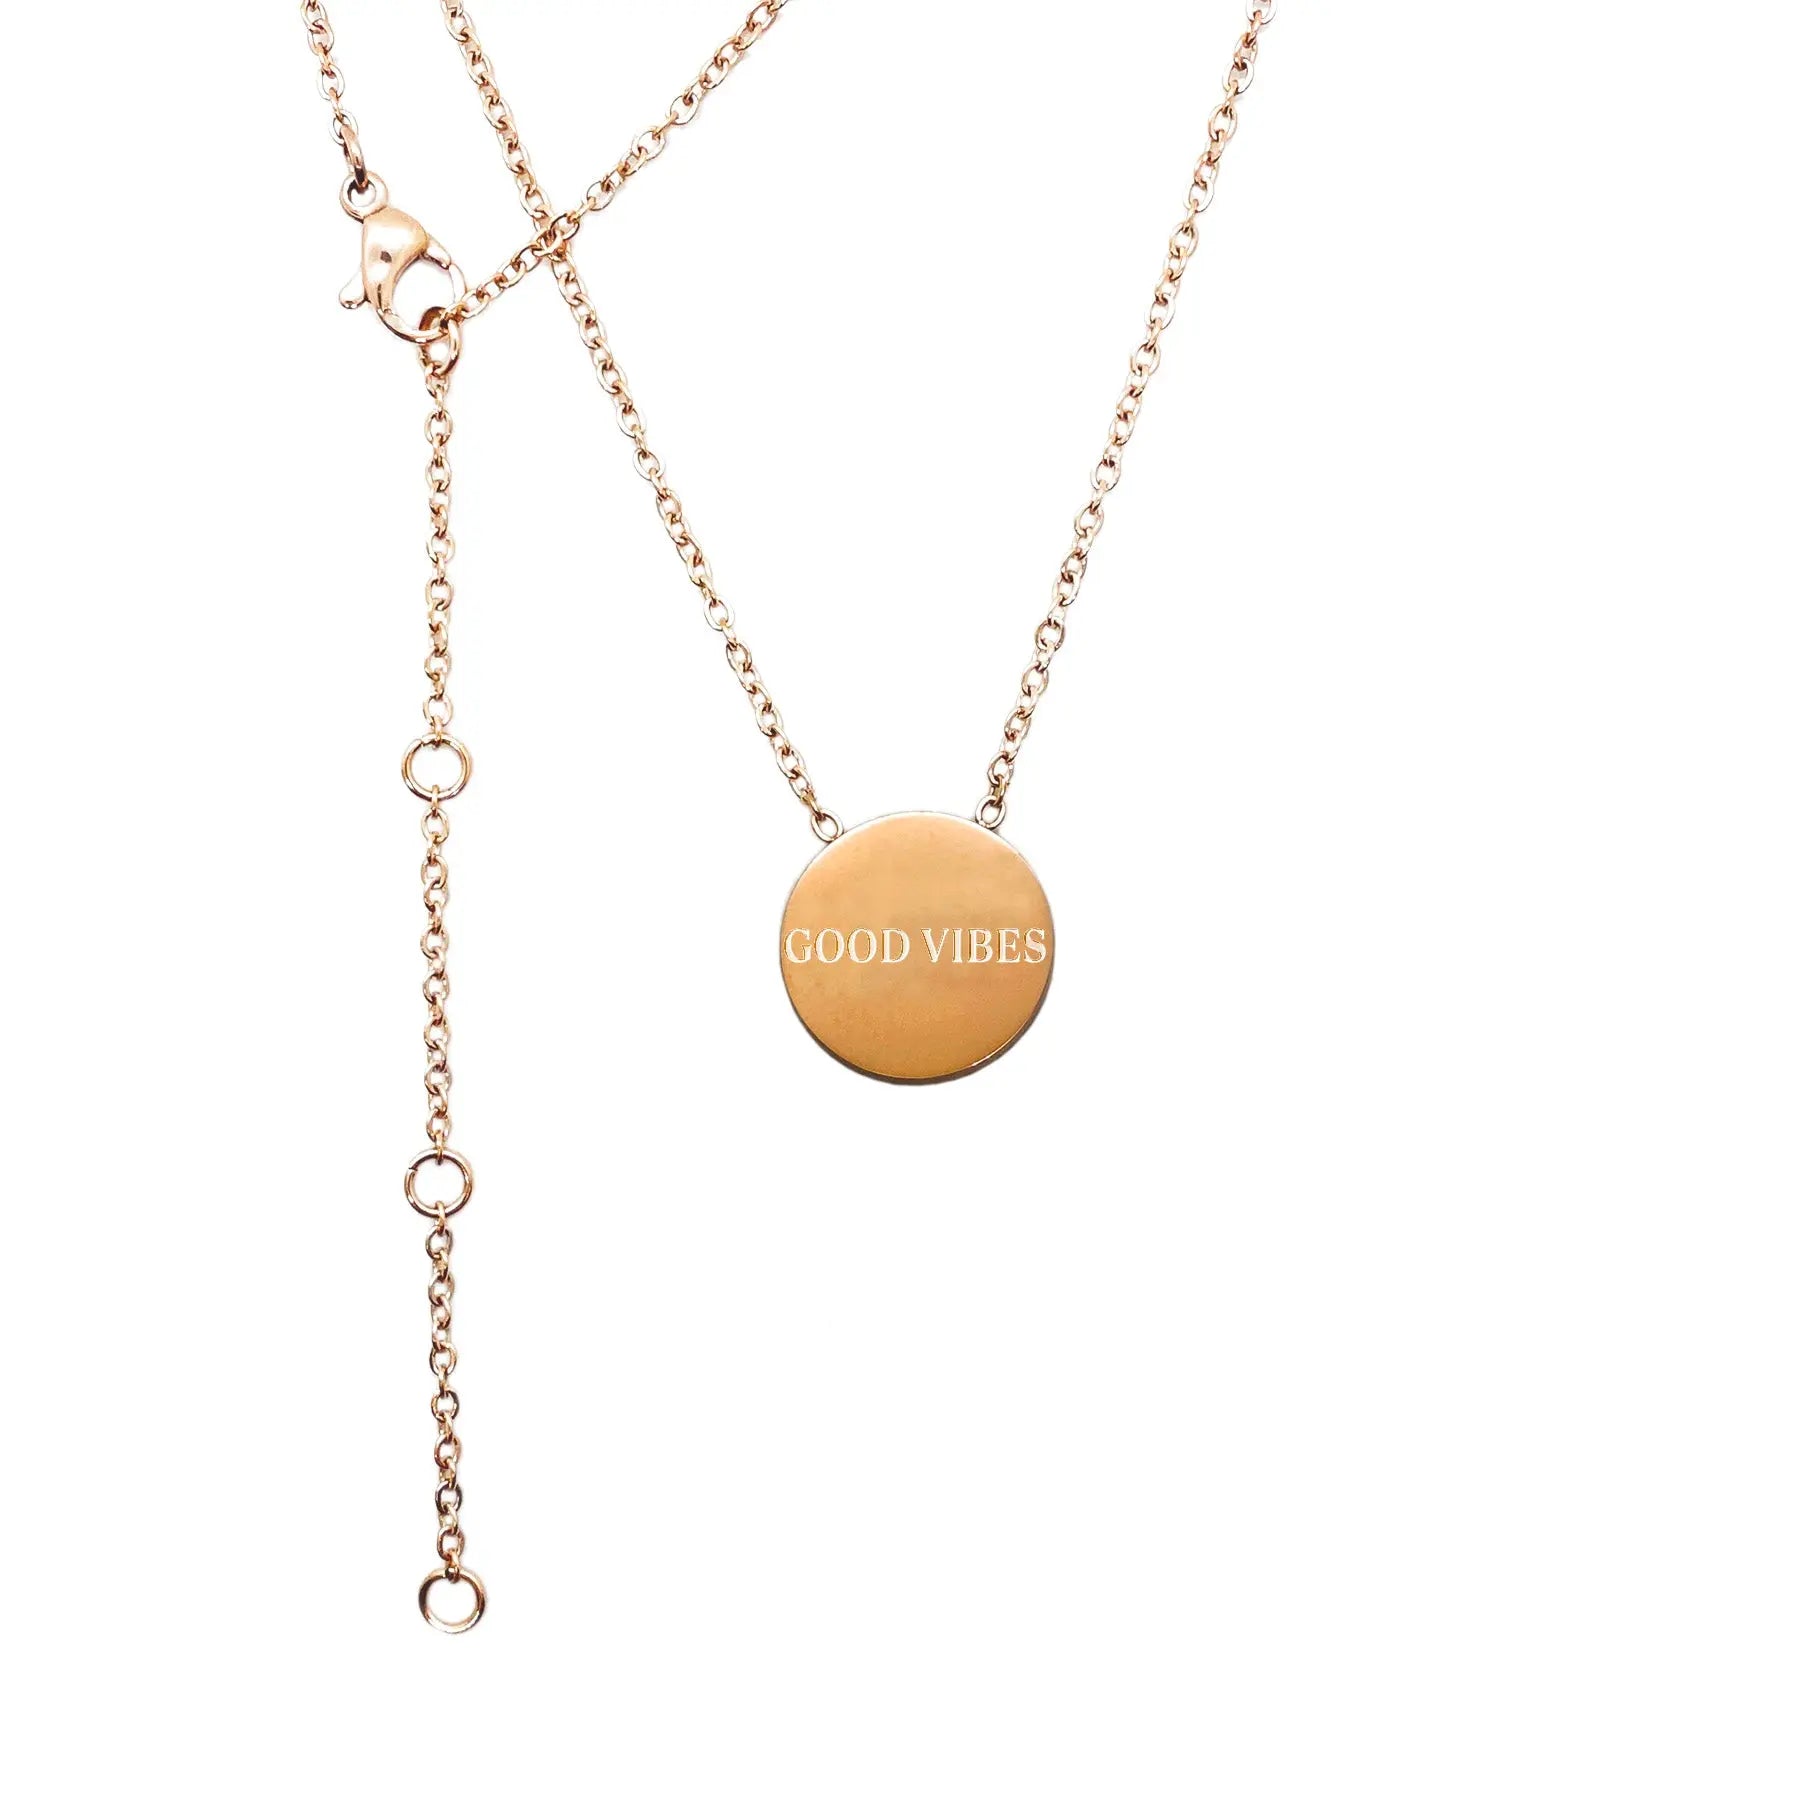 A durable stainless steel necklace with a 18mm medallion, featuring a circle pendant on a chain. Available in silver, rose gold, and gold finishes.